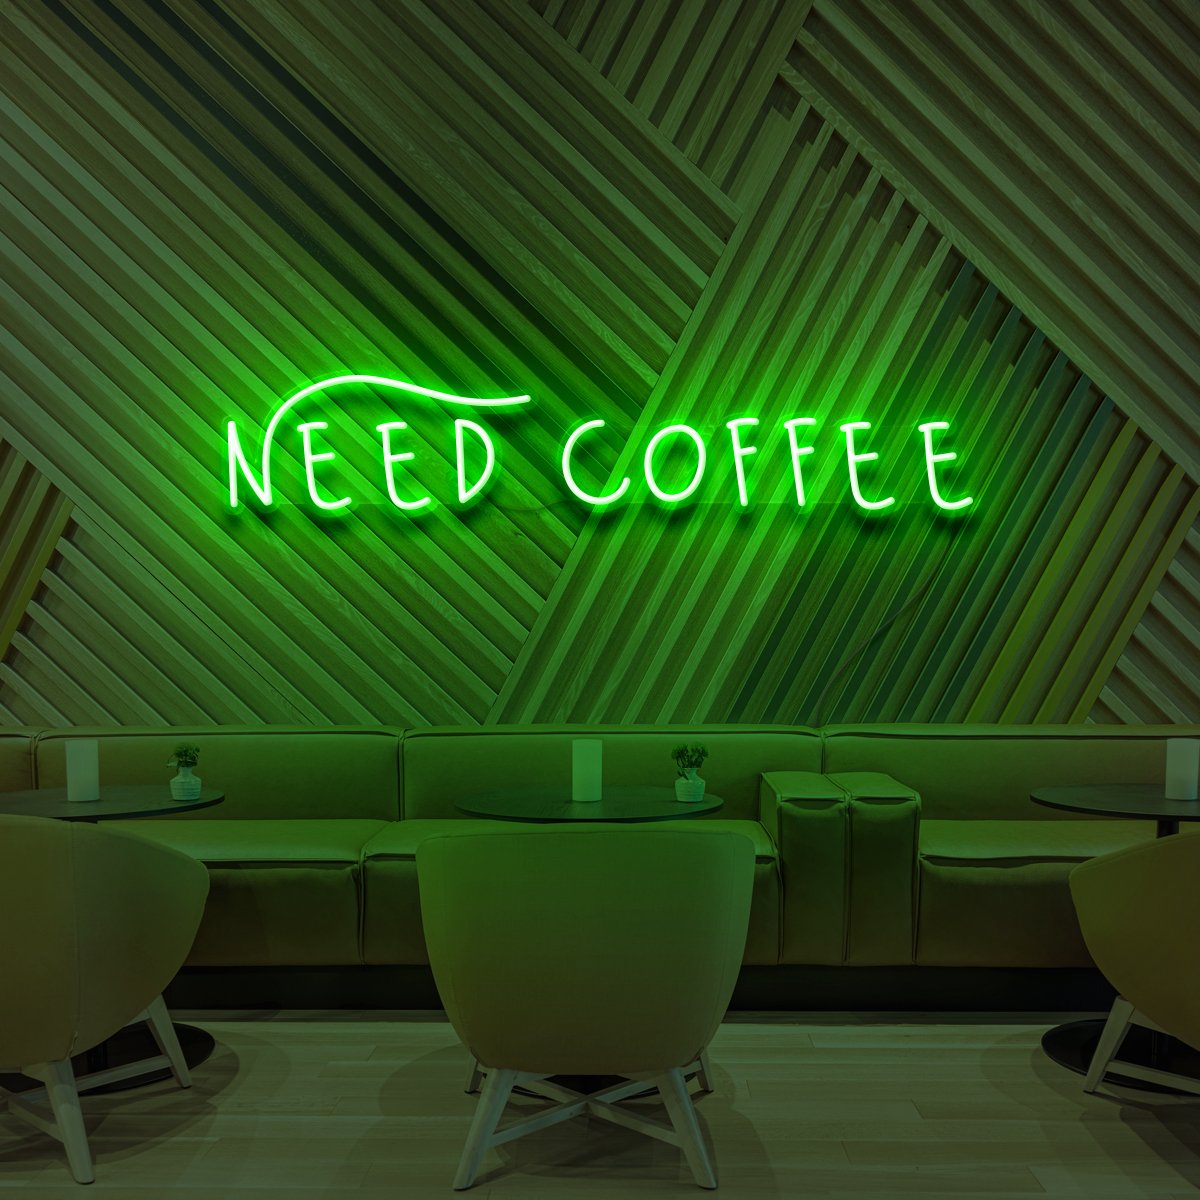 "Need Coffee" Neon Sign for Cafés 60cm (2ft) / Green / LED Neon by Neon Icons